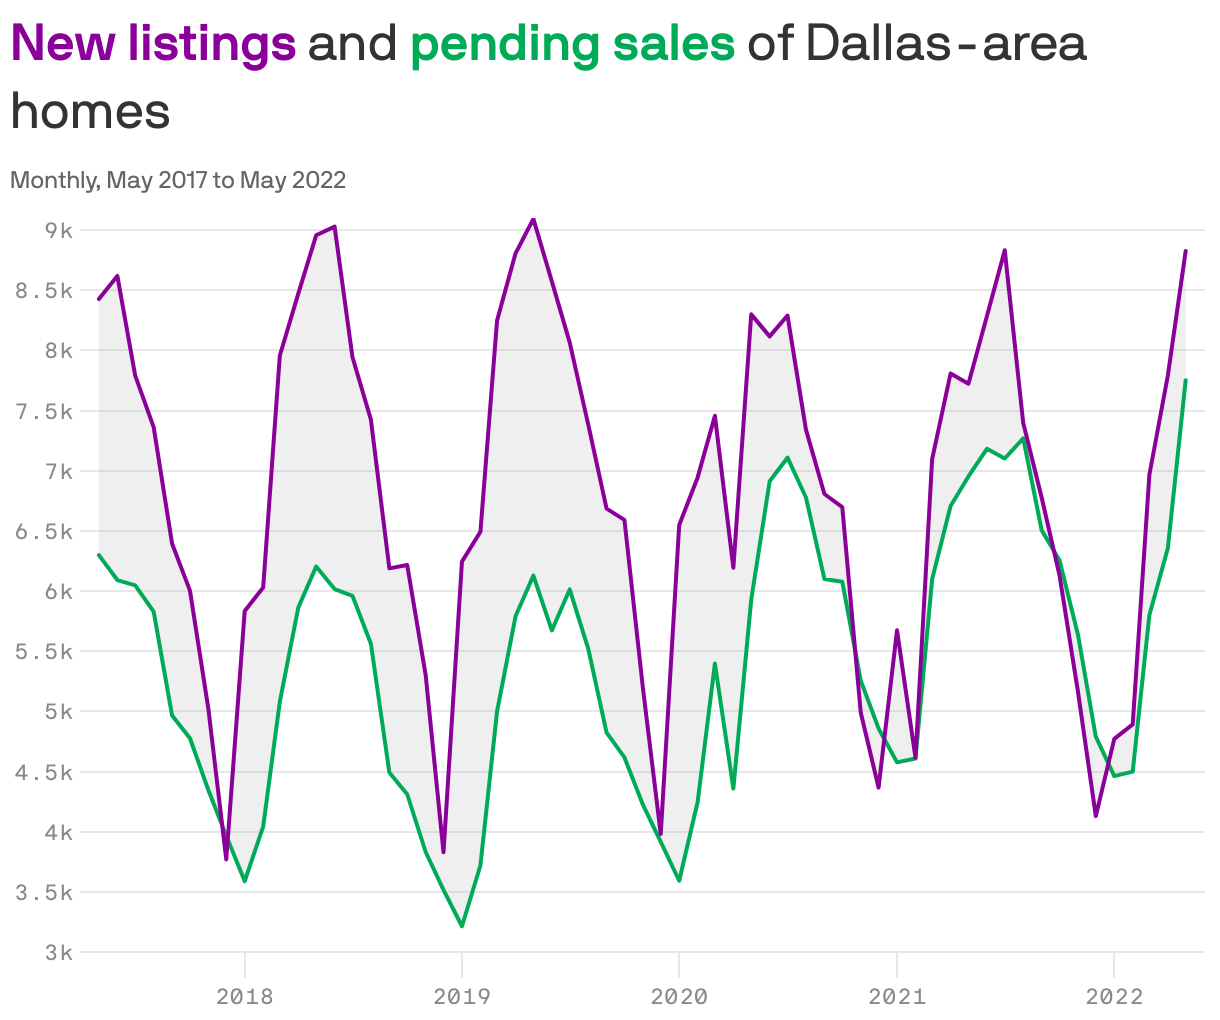 <b style='color: #8a0098'>New listings</b> and <b style='color: #00ab58'>pending sales</b> of Dallas-area homes